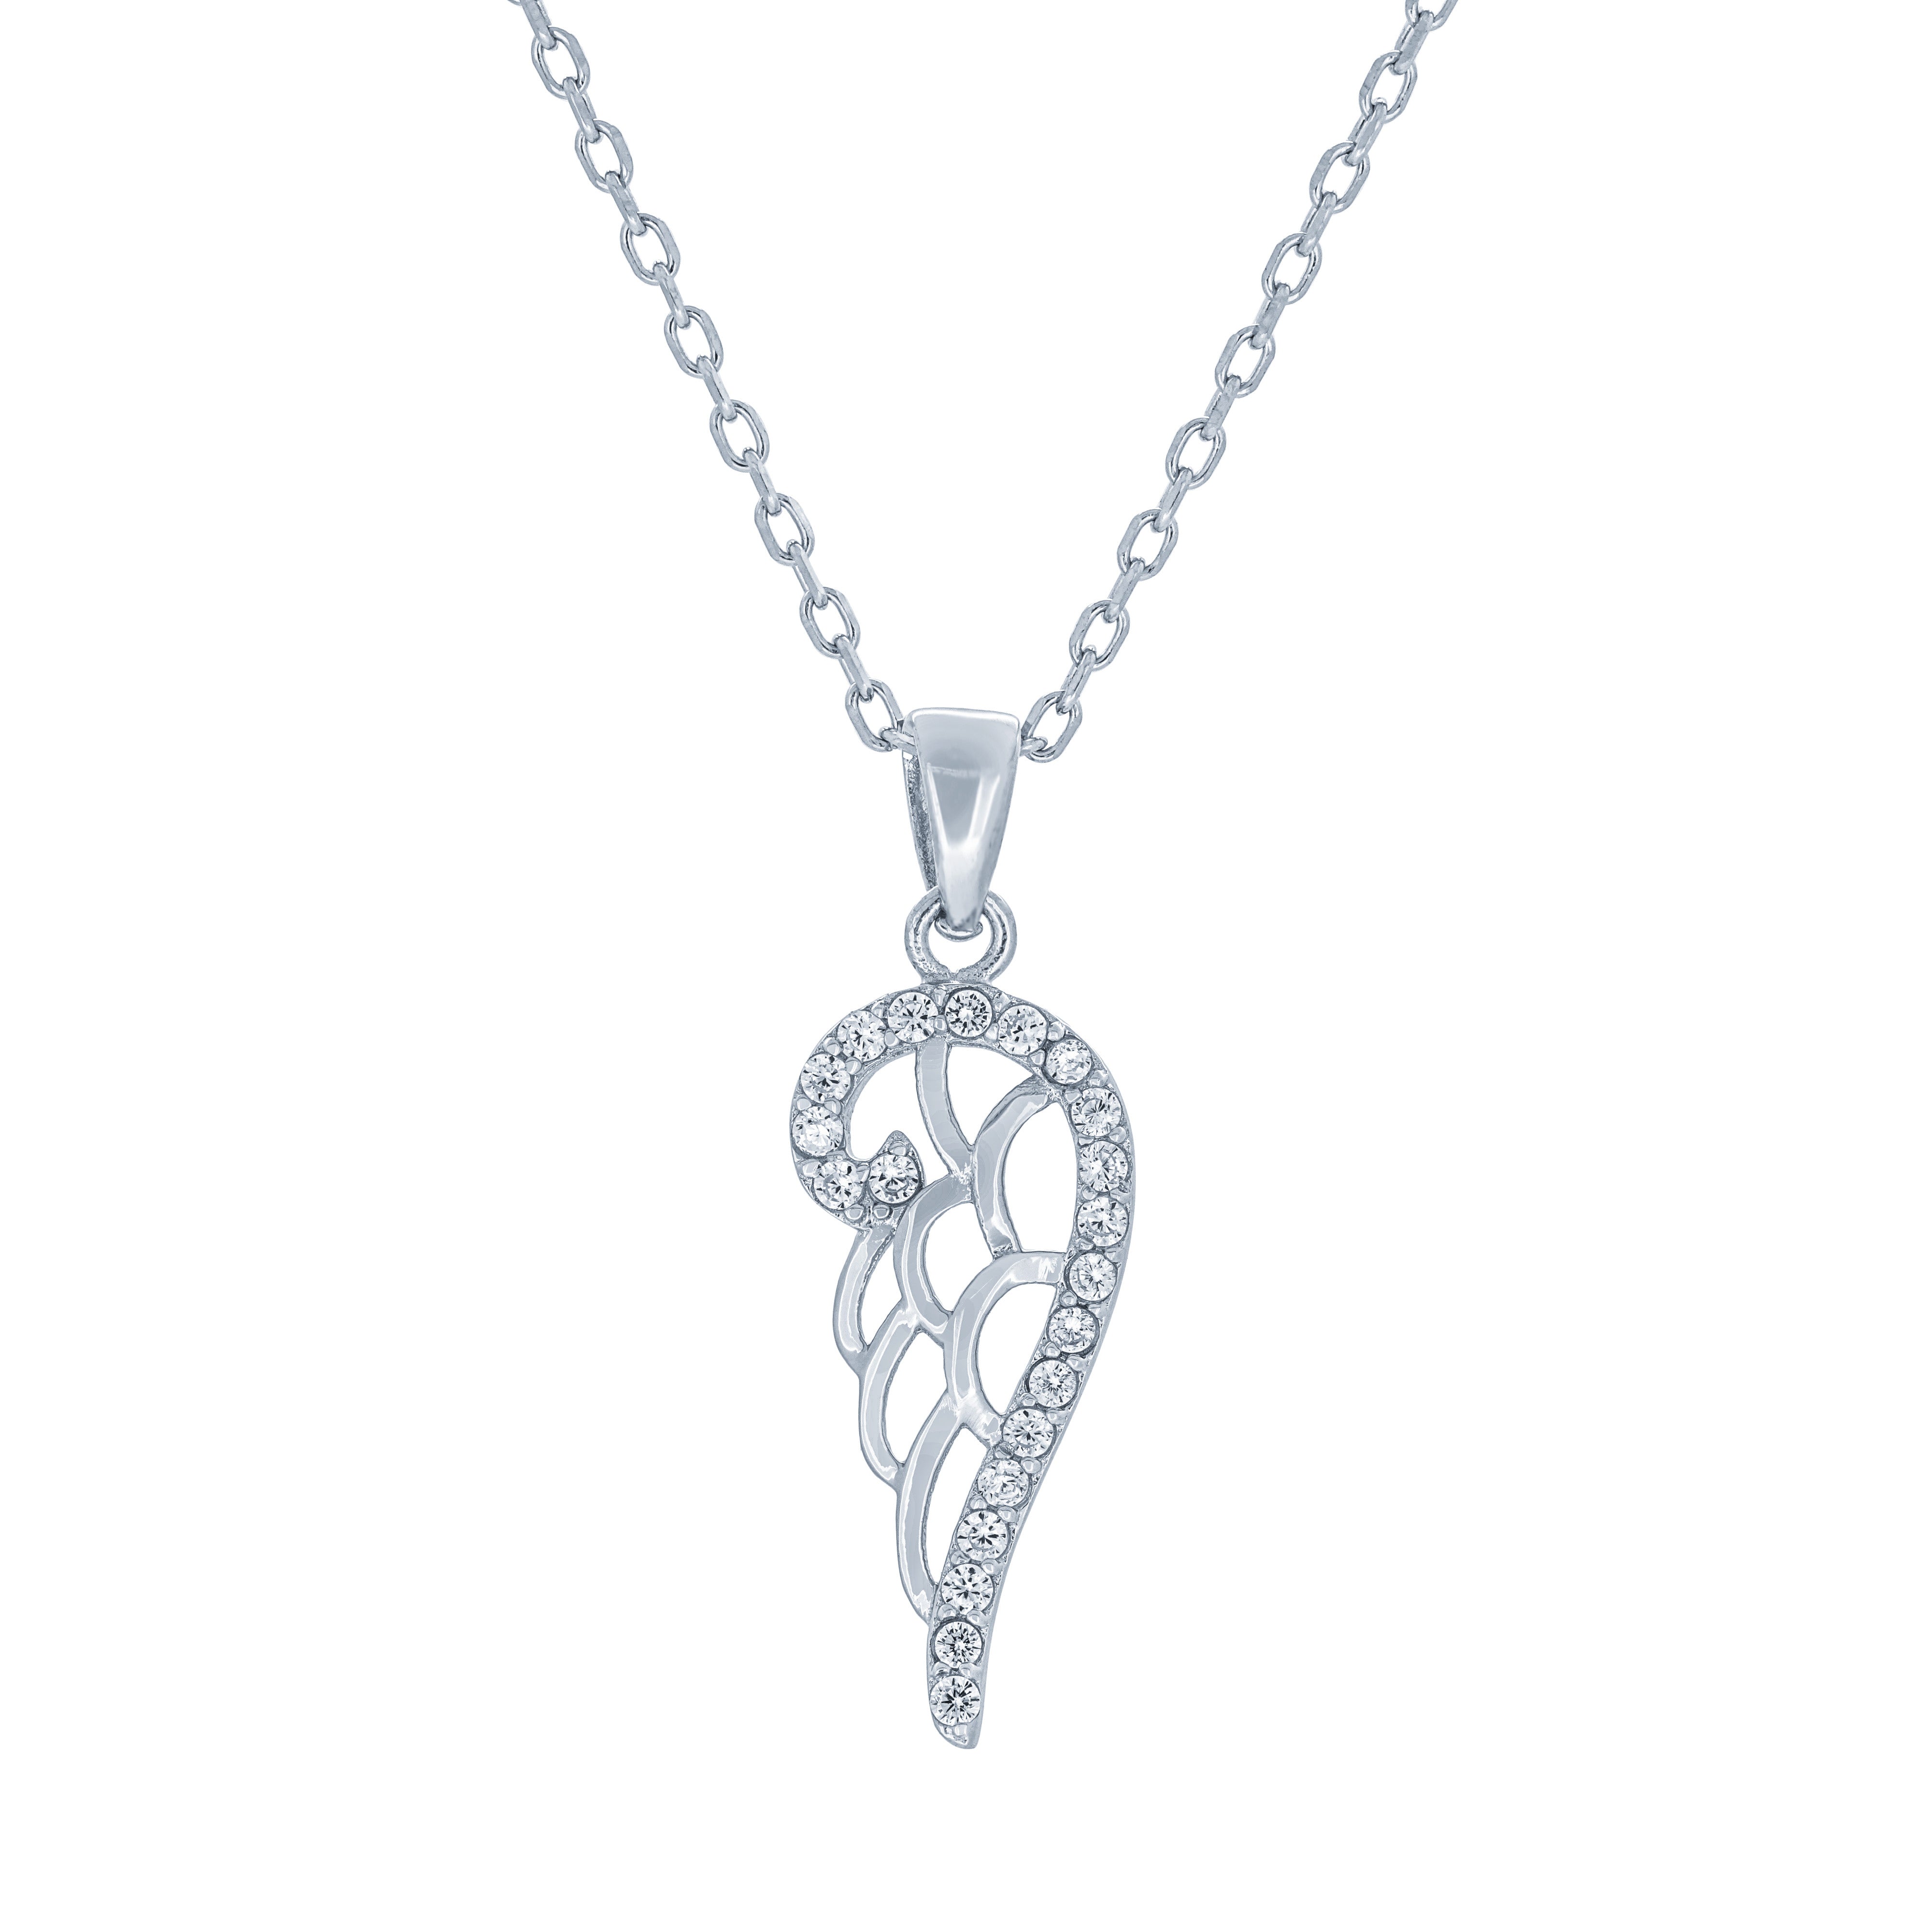 (100035) White Cubic Zirconia Angel Wing Pendant Necklace In Sterling Silver